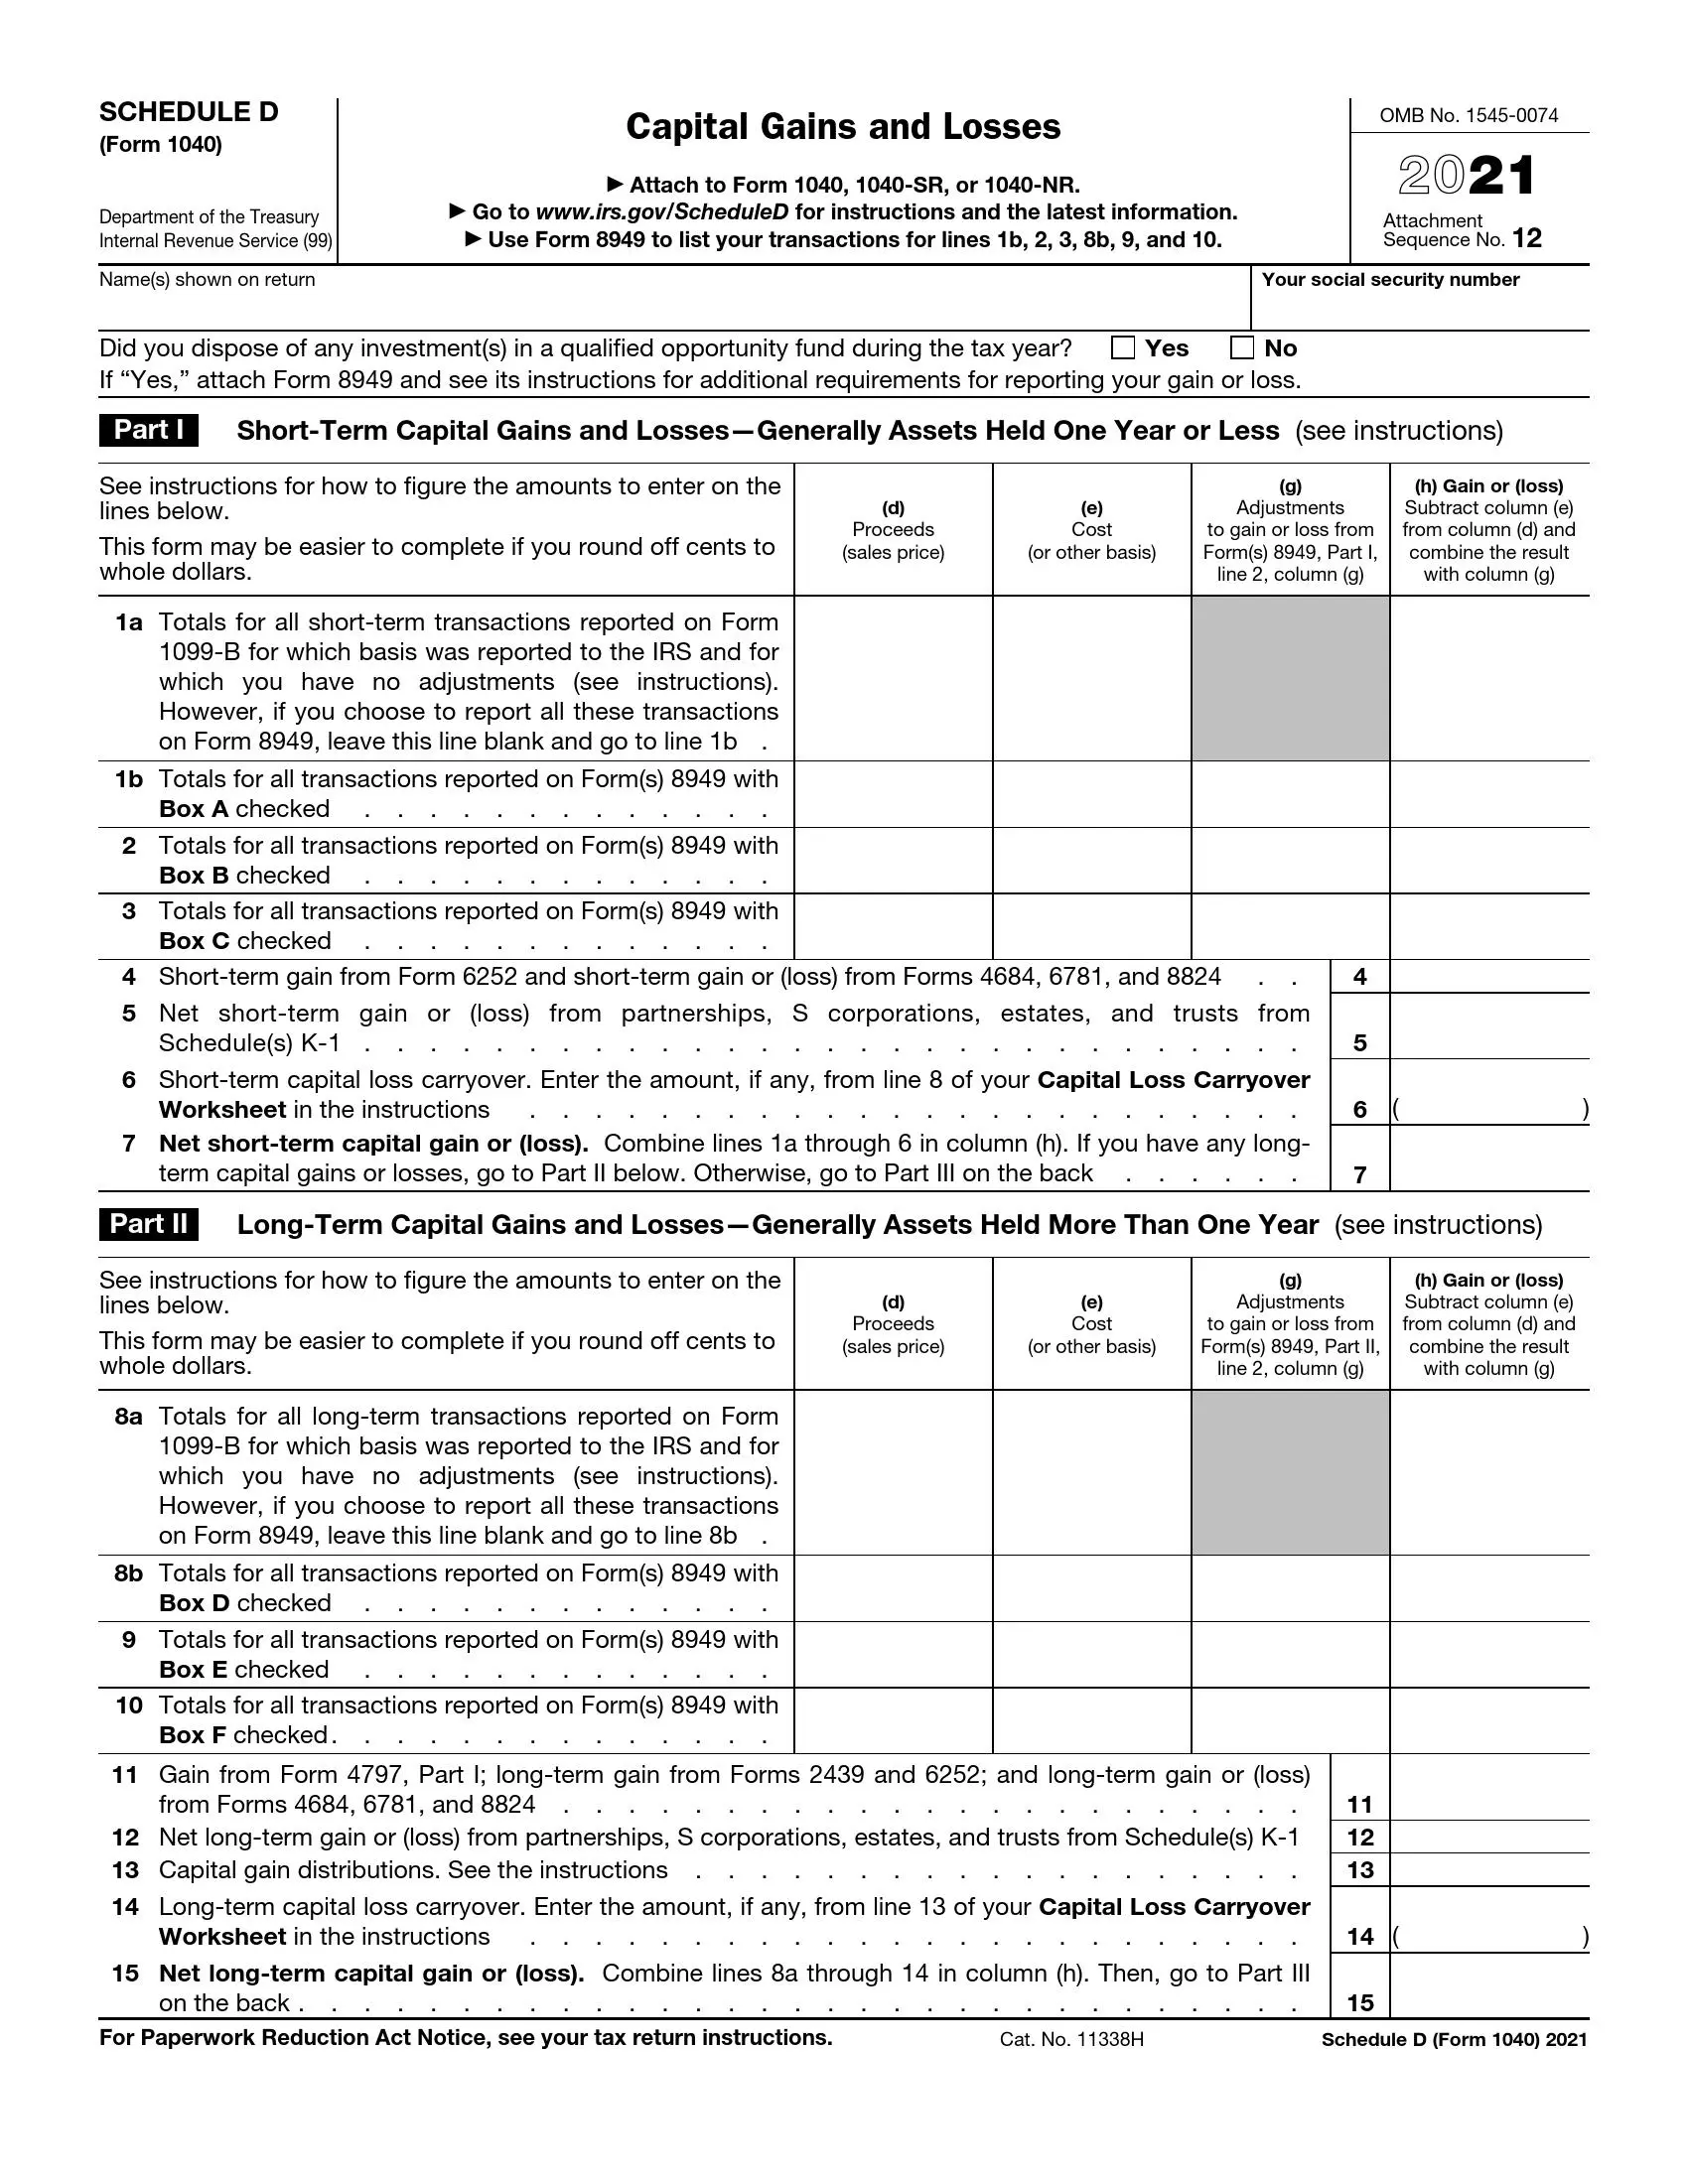 irs schedule d form 1040 or 1040-sr 2021 preview